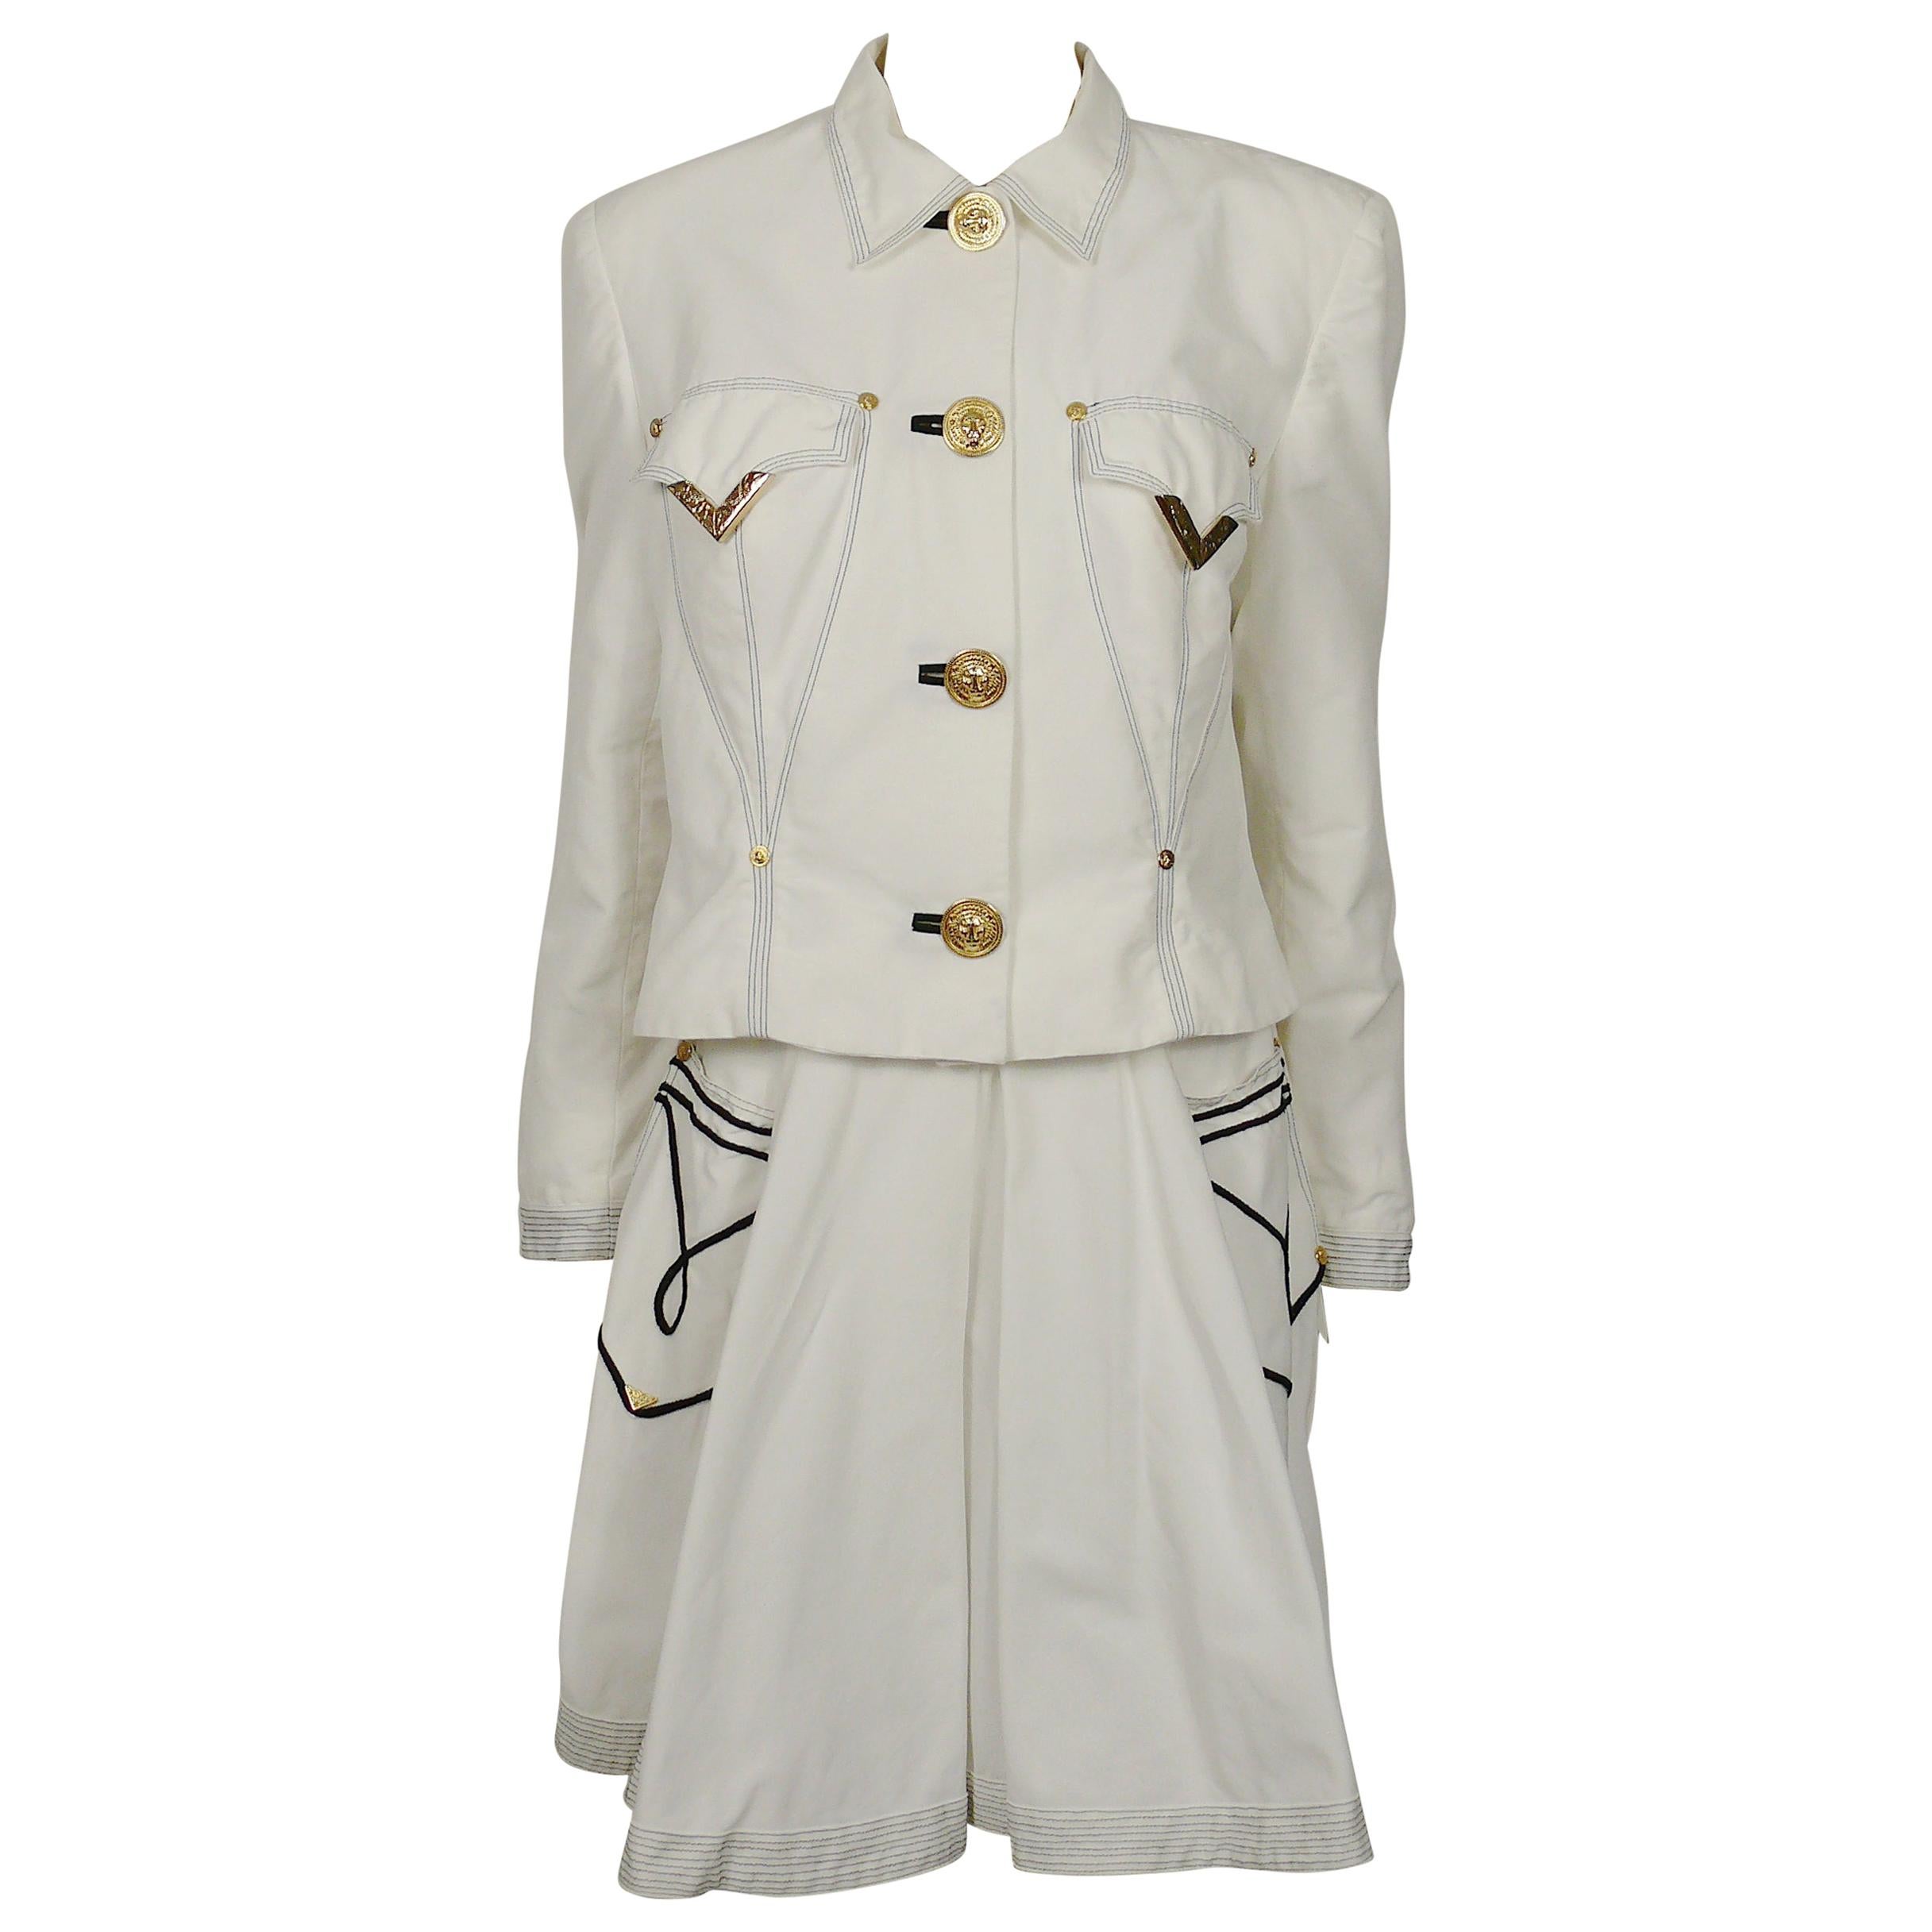 Gianni Versace Versus Vintage White Jacket & Skirt Ensemble with Western Details For Sale